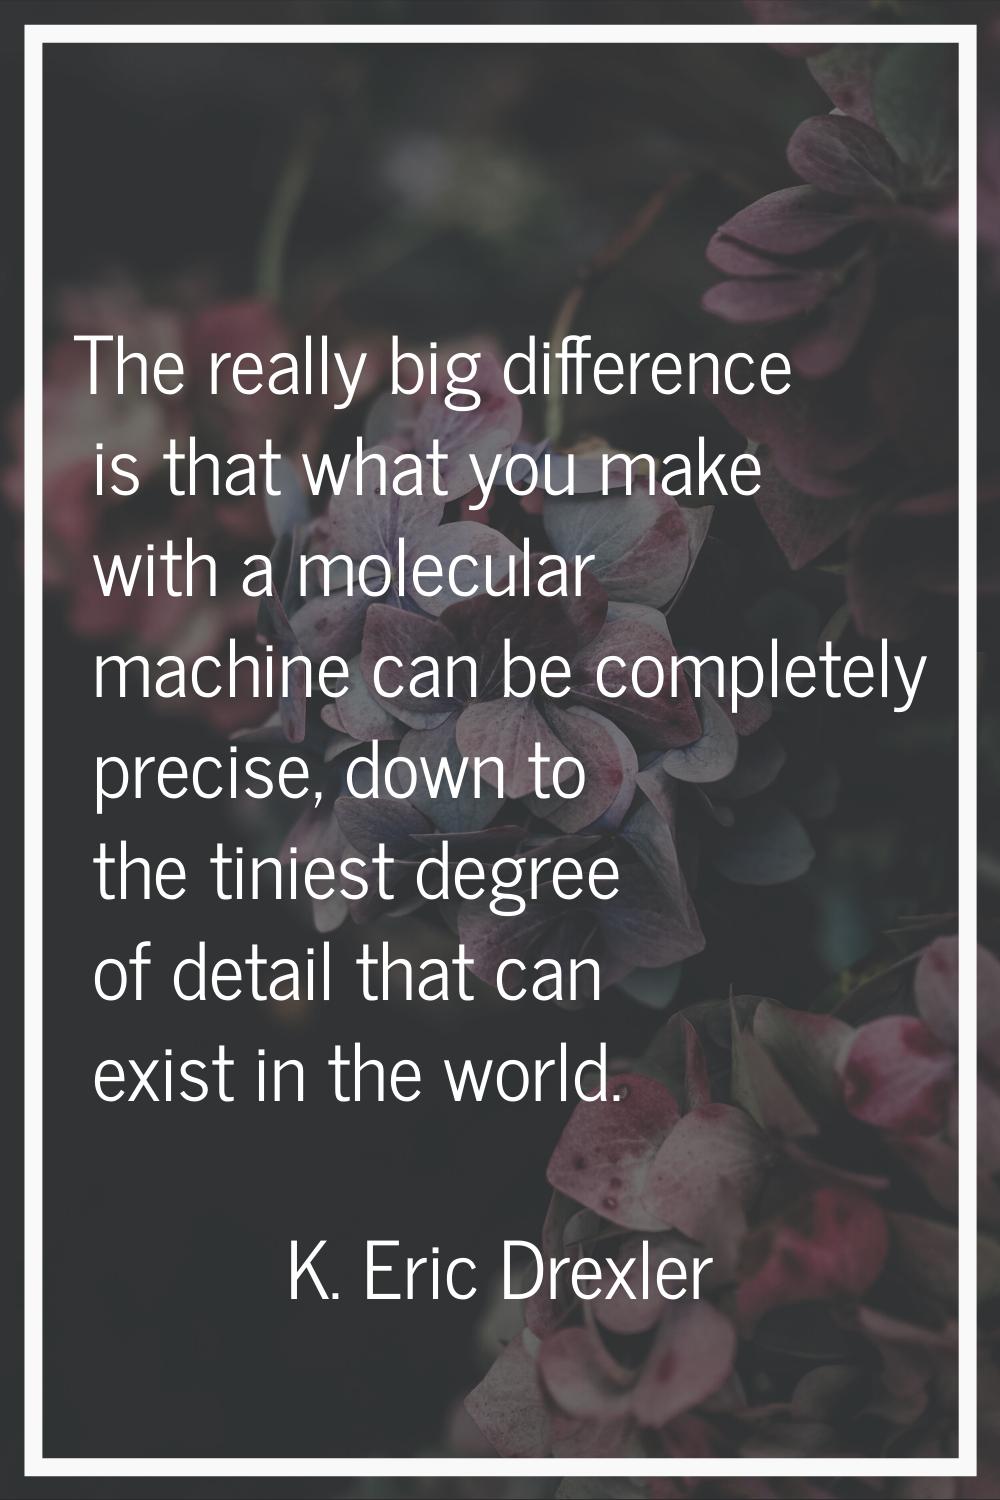 The really big difference is that what you make with a molecular machine can be completely precise,